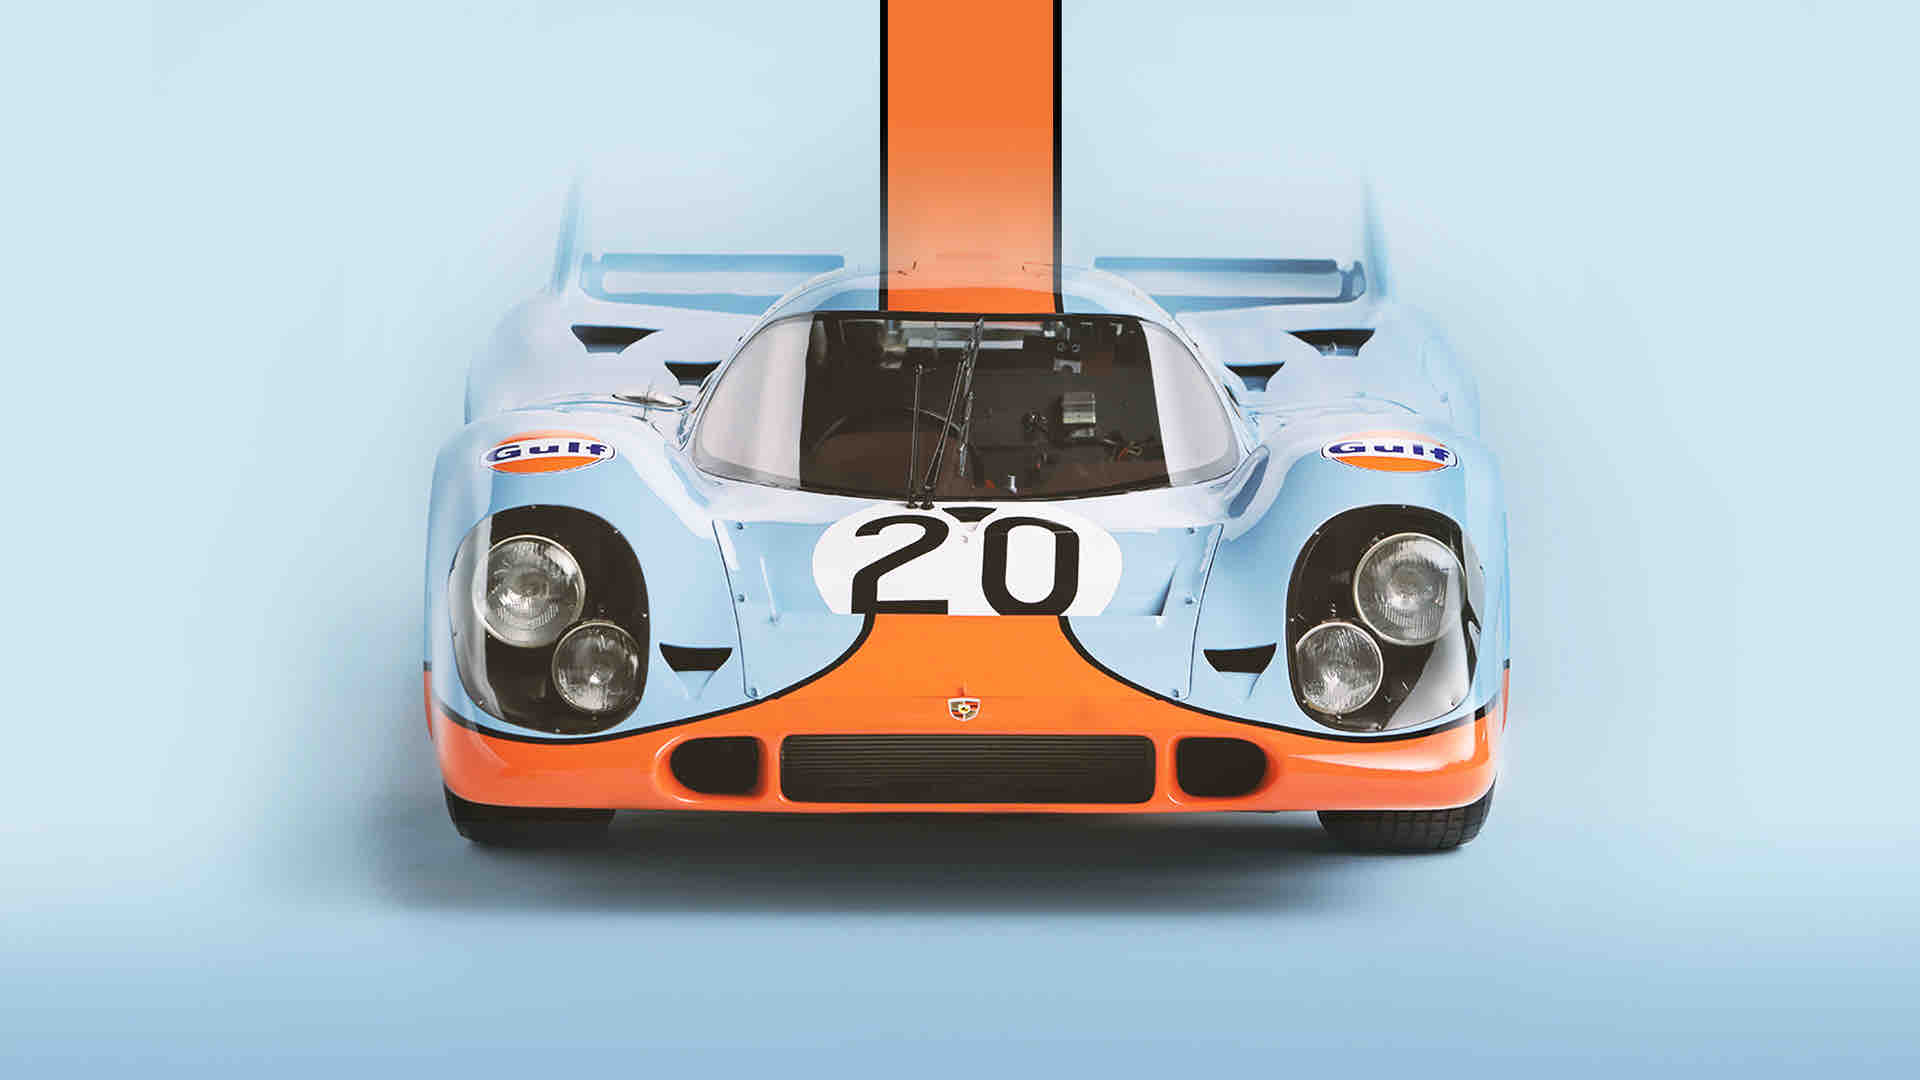 The Many Cool Liveries of the Porsche 917 (Video and Gallery)